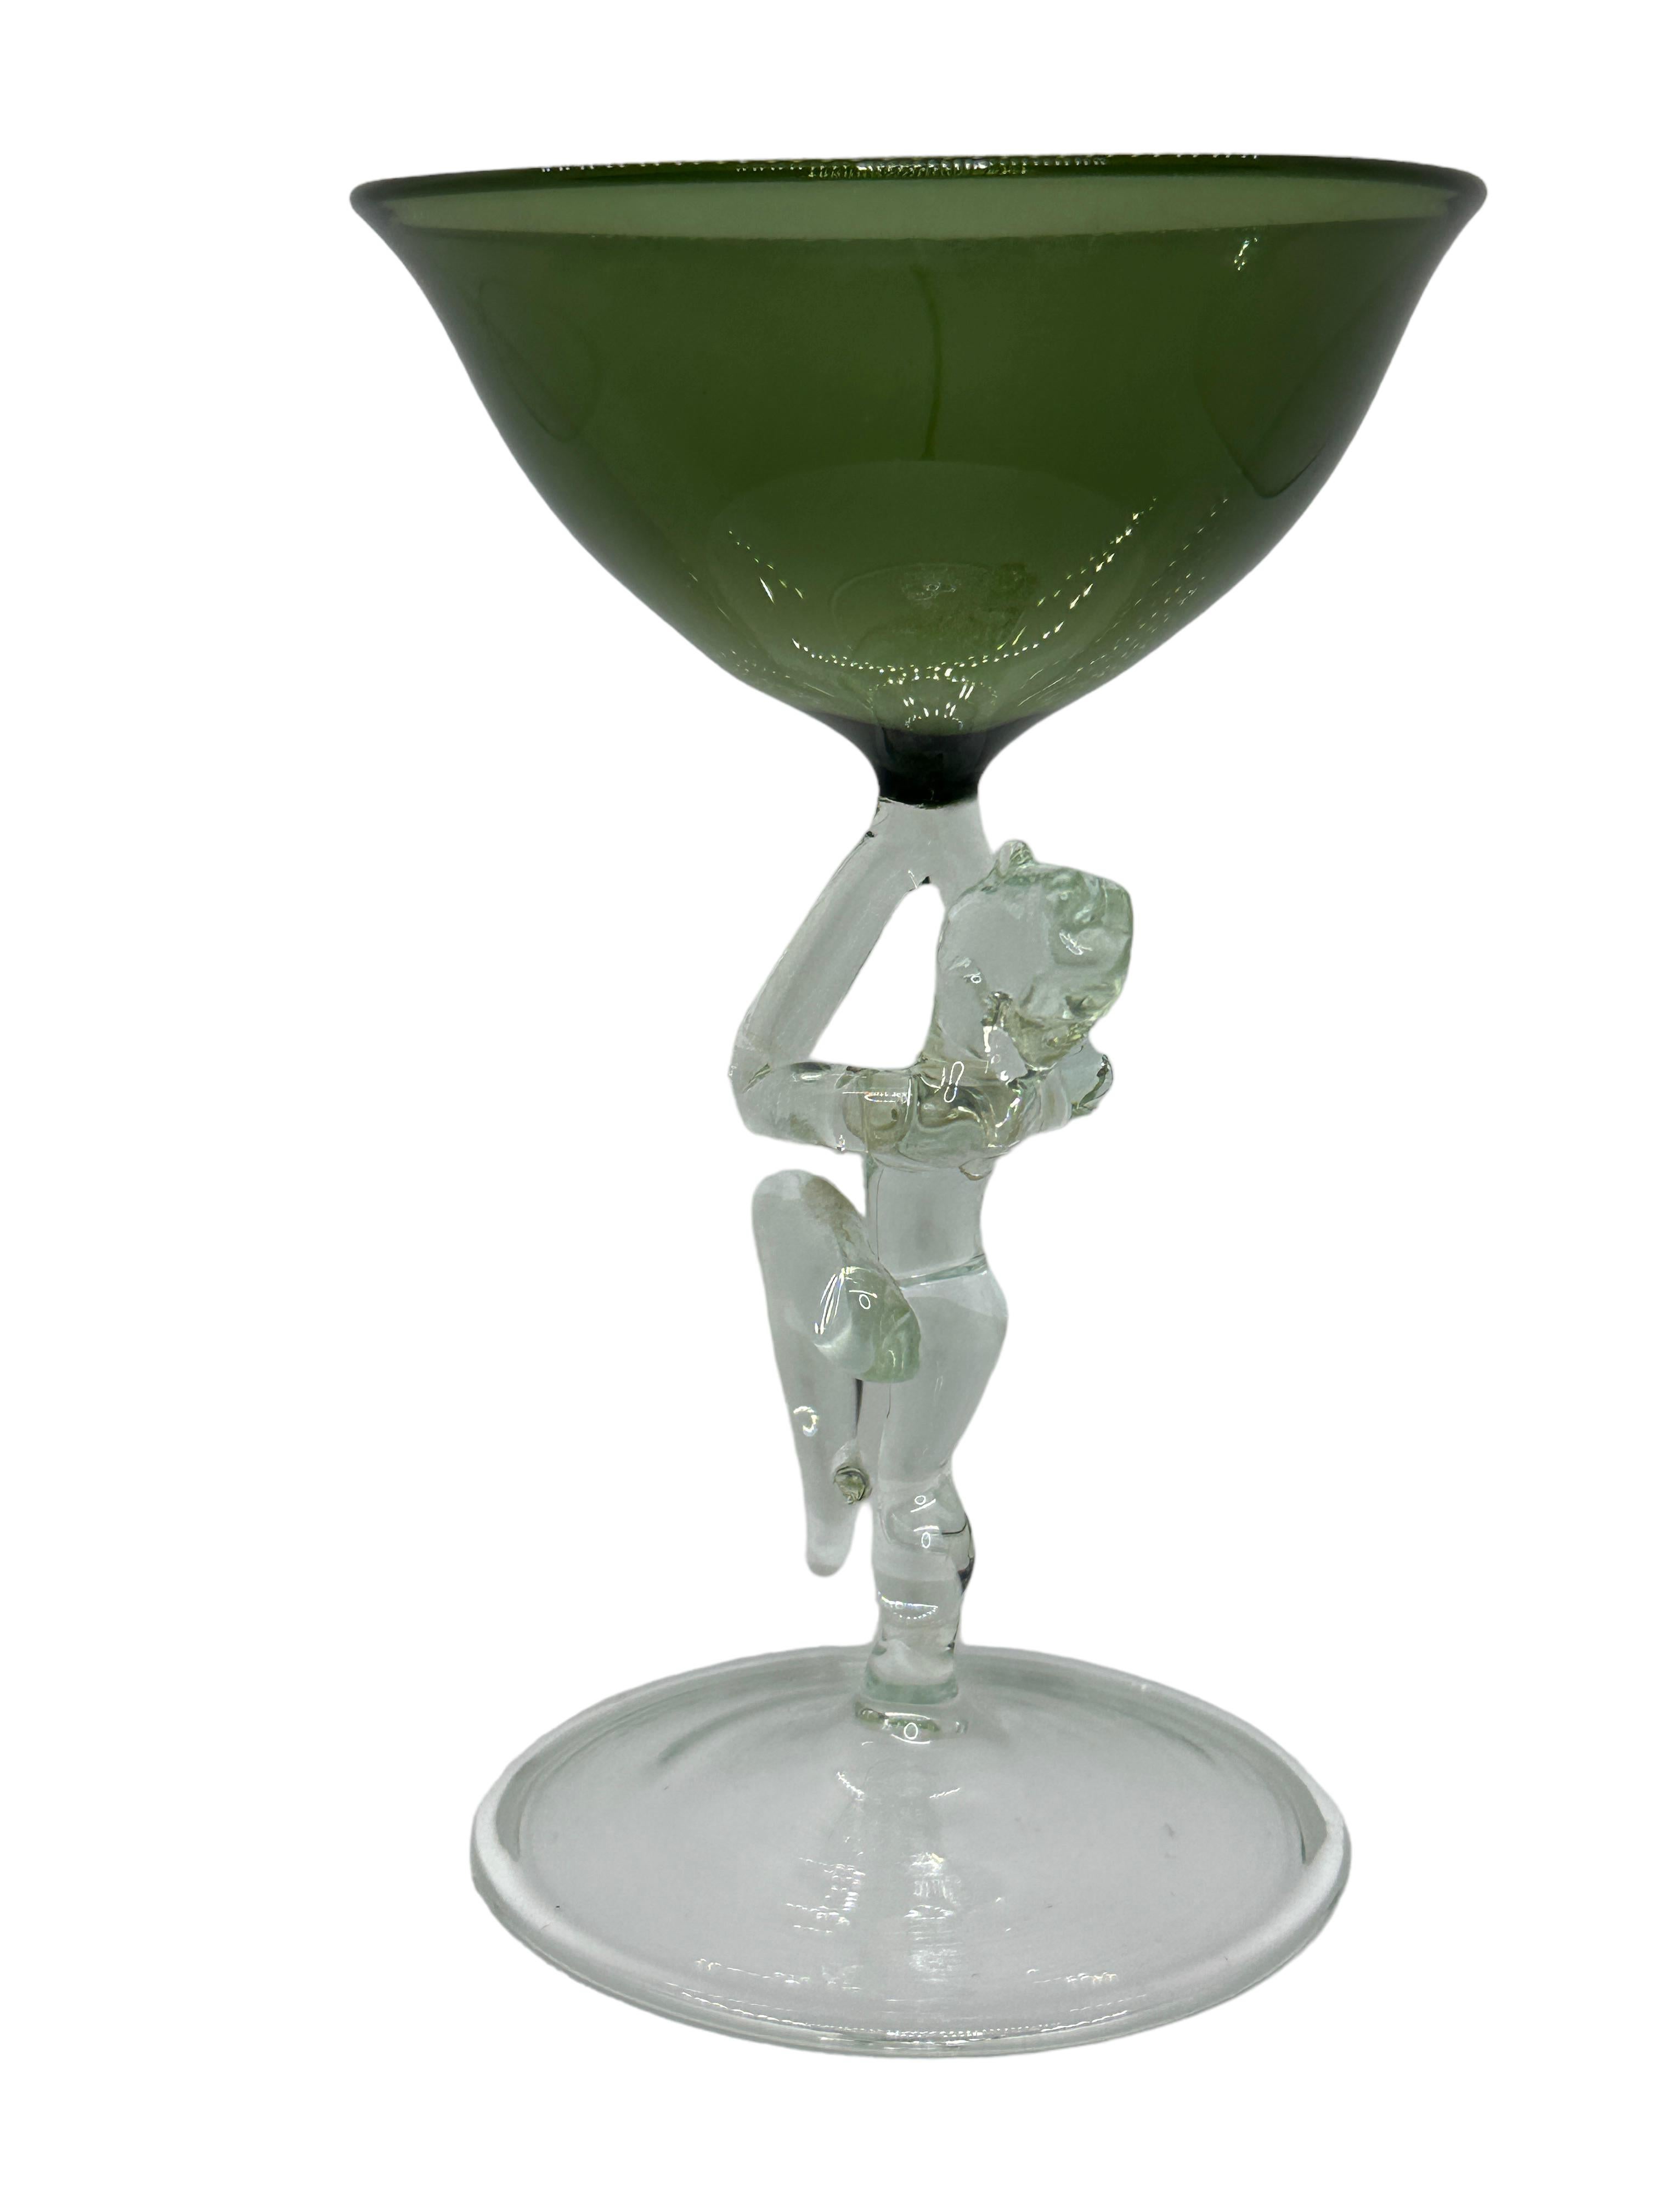 This is a beautiful single vintage stemmed cocktail glass from Austria. It features a bare women's shaft and is Bimini art style. The glass has a wonderful design, the stem depicts a nude lady in clear color. The base is a beautiful clear glass. The